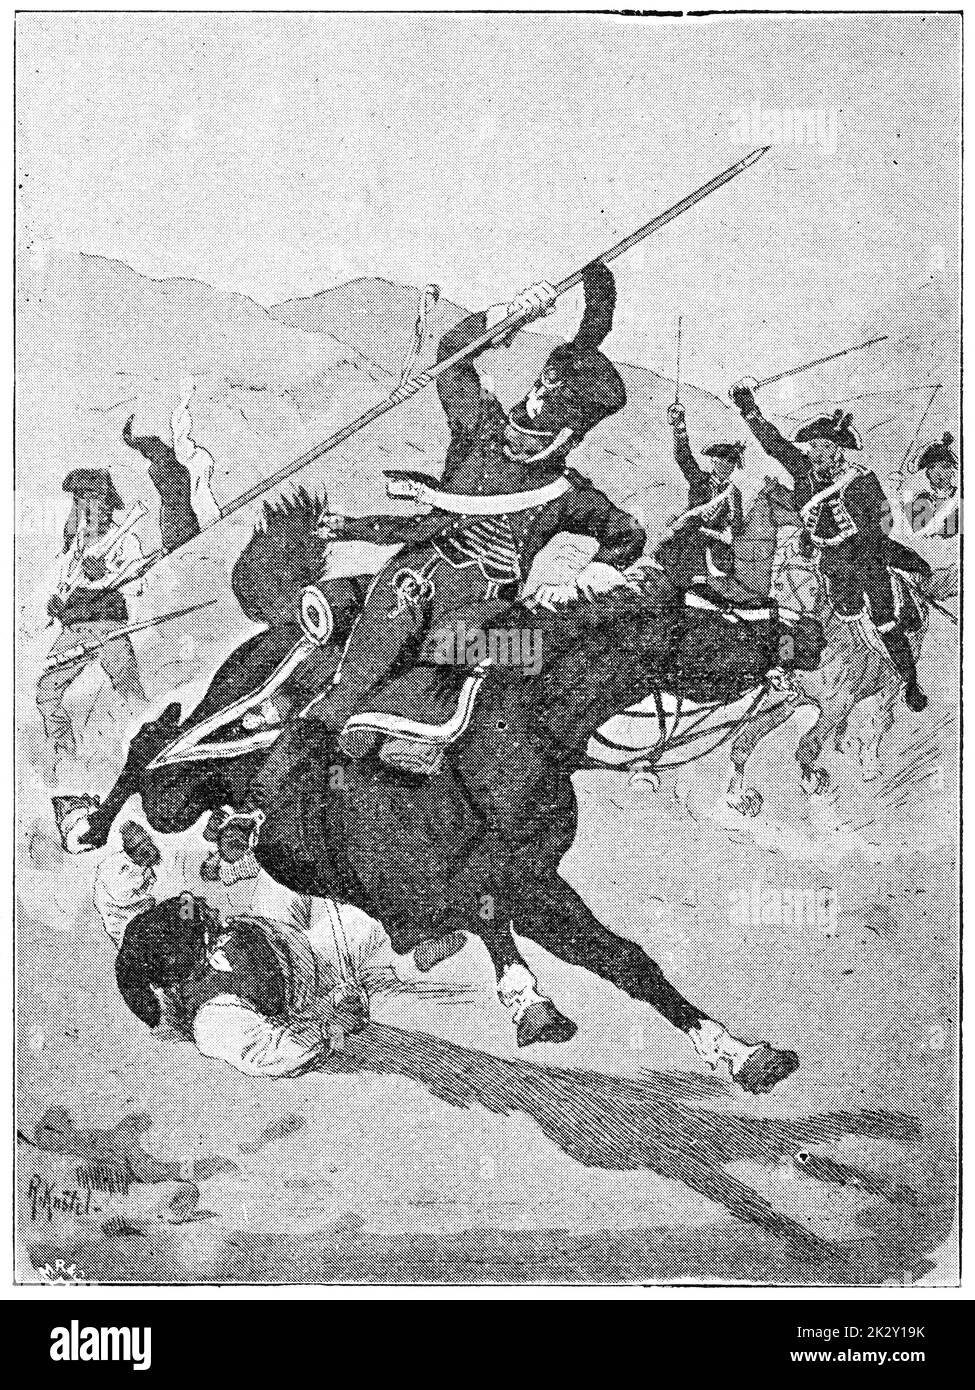 French lancer gendarme from 1810 in battle with Spanish guerrillas. Illustration of the 19th century. Germany. White background. Stock Photo